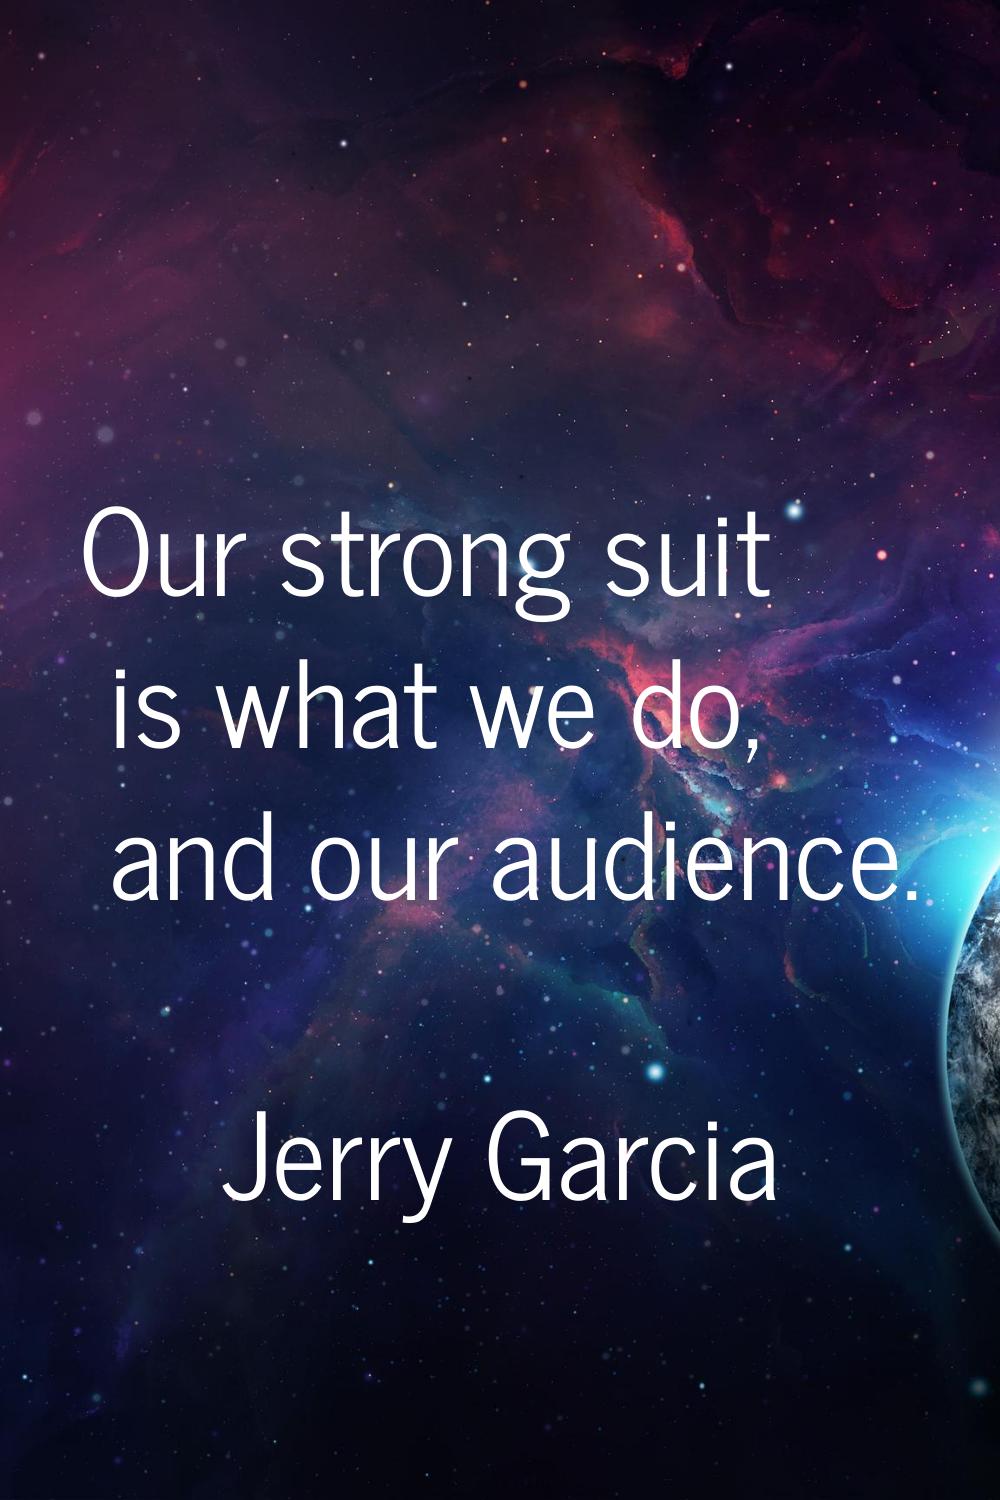 Our strong suit is what we do, and our audience.